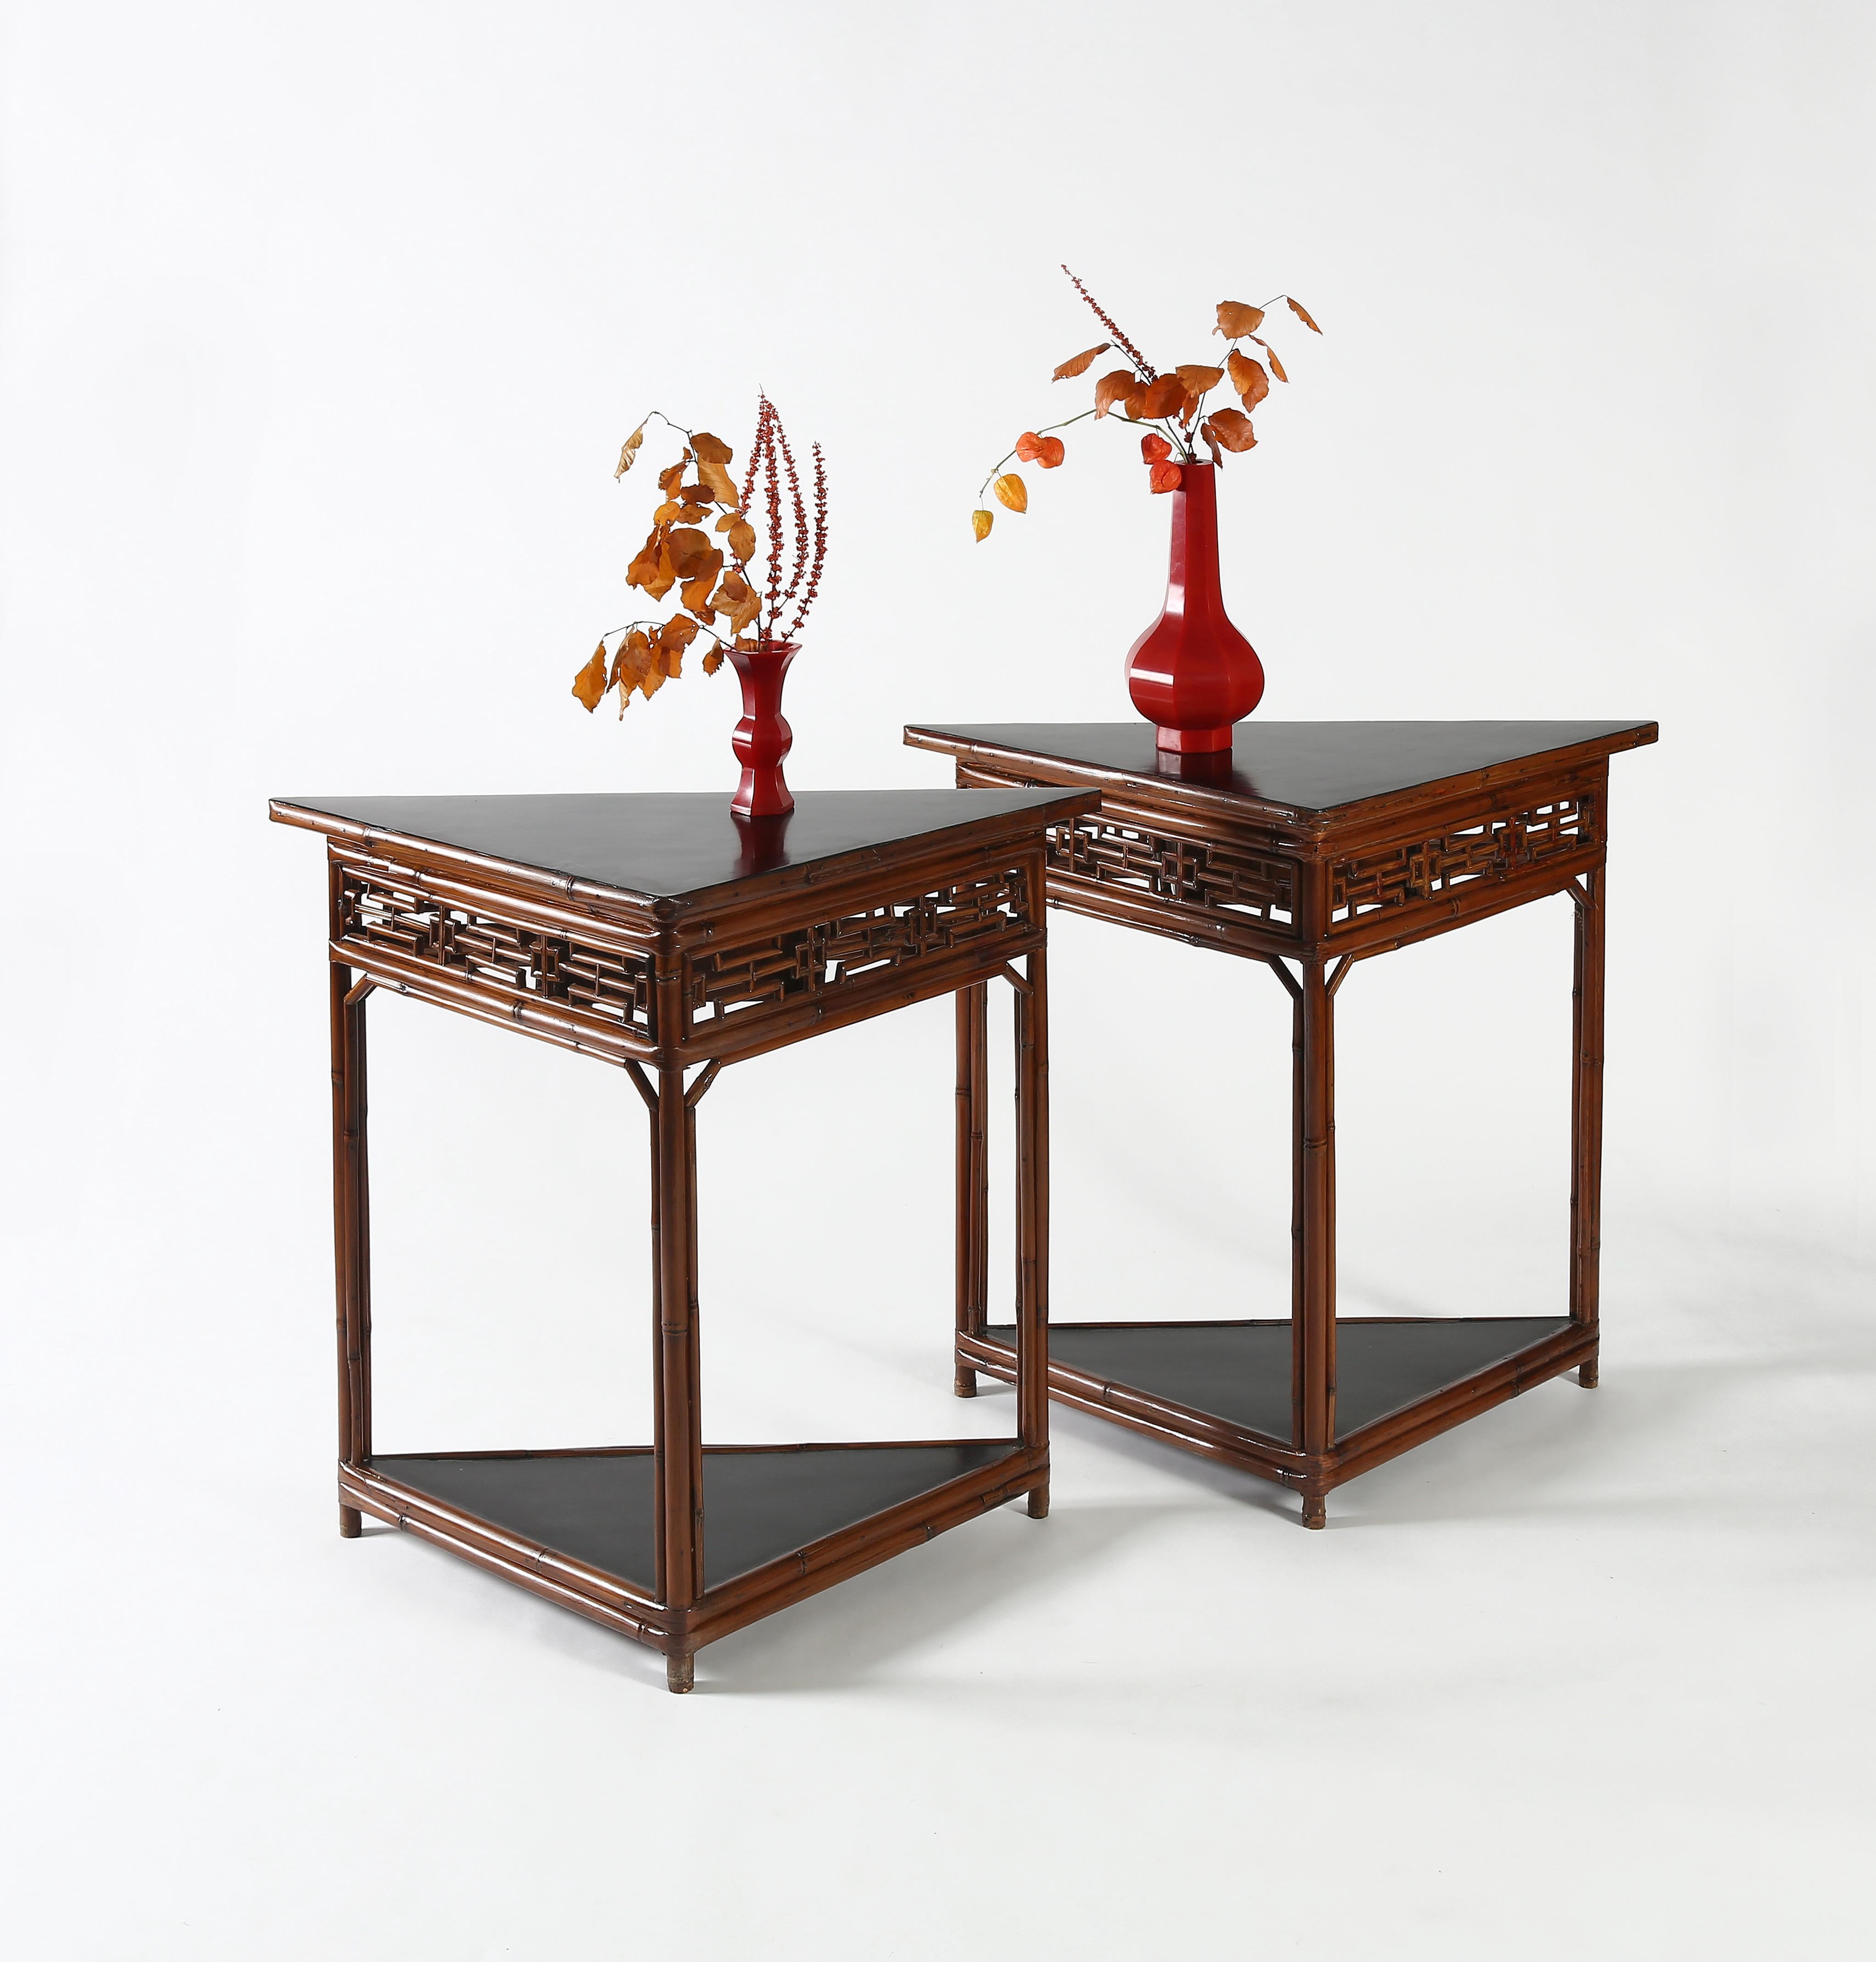 Each triangular table with black lacquer wooden top, supported on three legs with wrapped-around stretchers enclosing a lattice apron and a hidden drawer on one side, arch apron spandrels bracing the legs, reinforced by a bottom wooden panel with